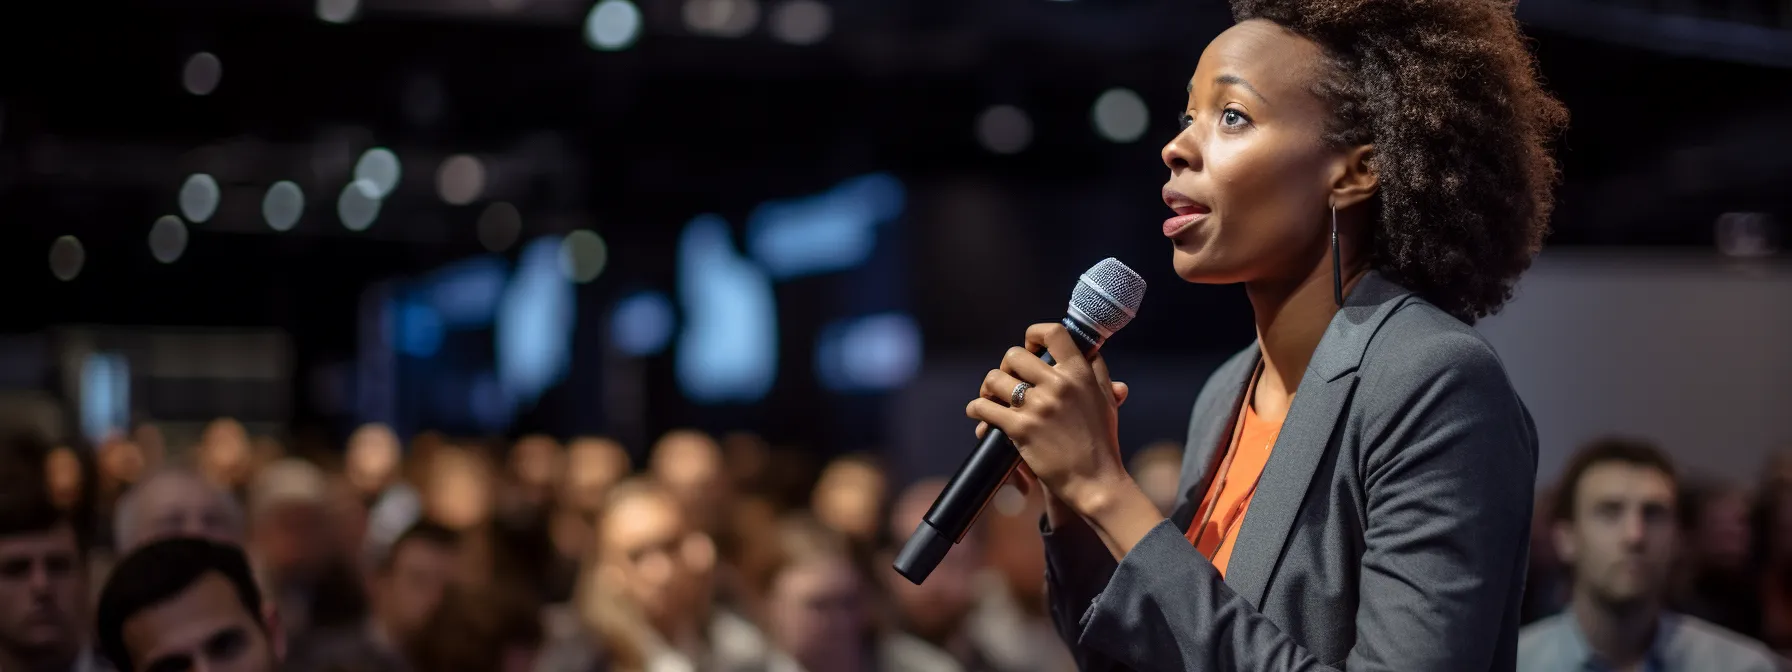 a woman passionately speaking at a conference with a mesmerized audience.